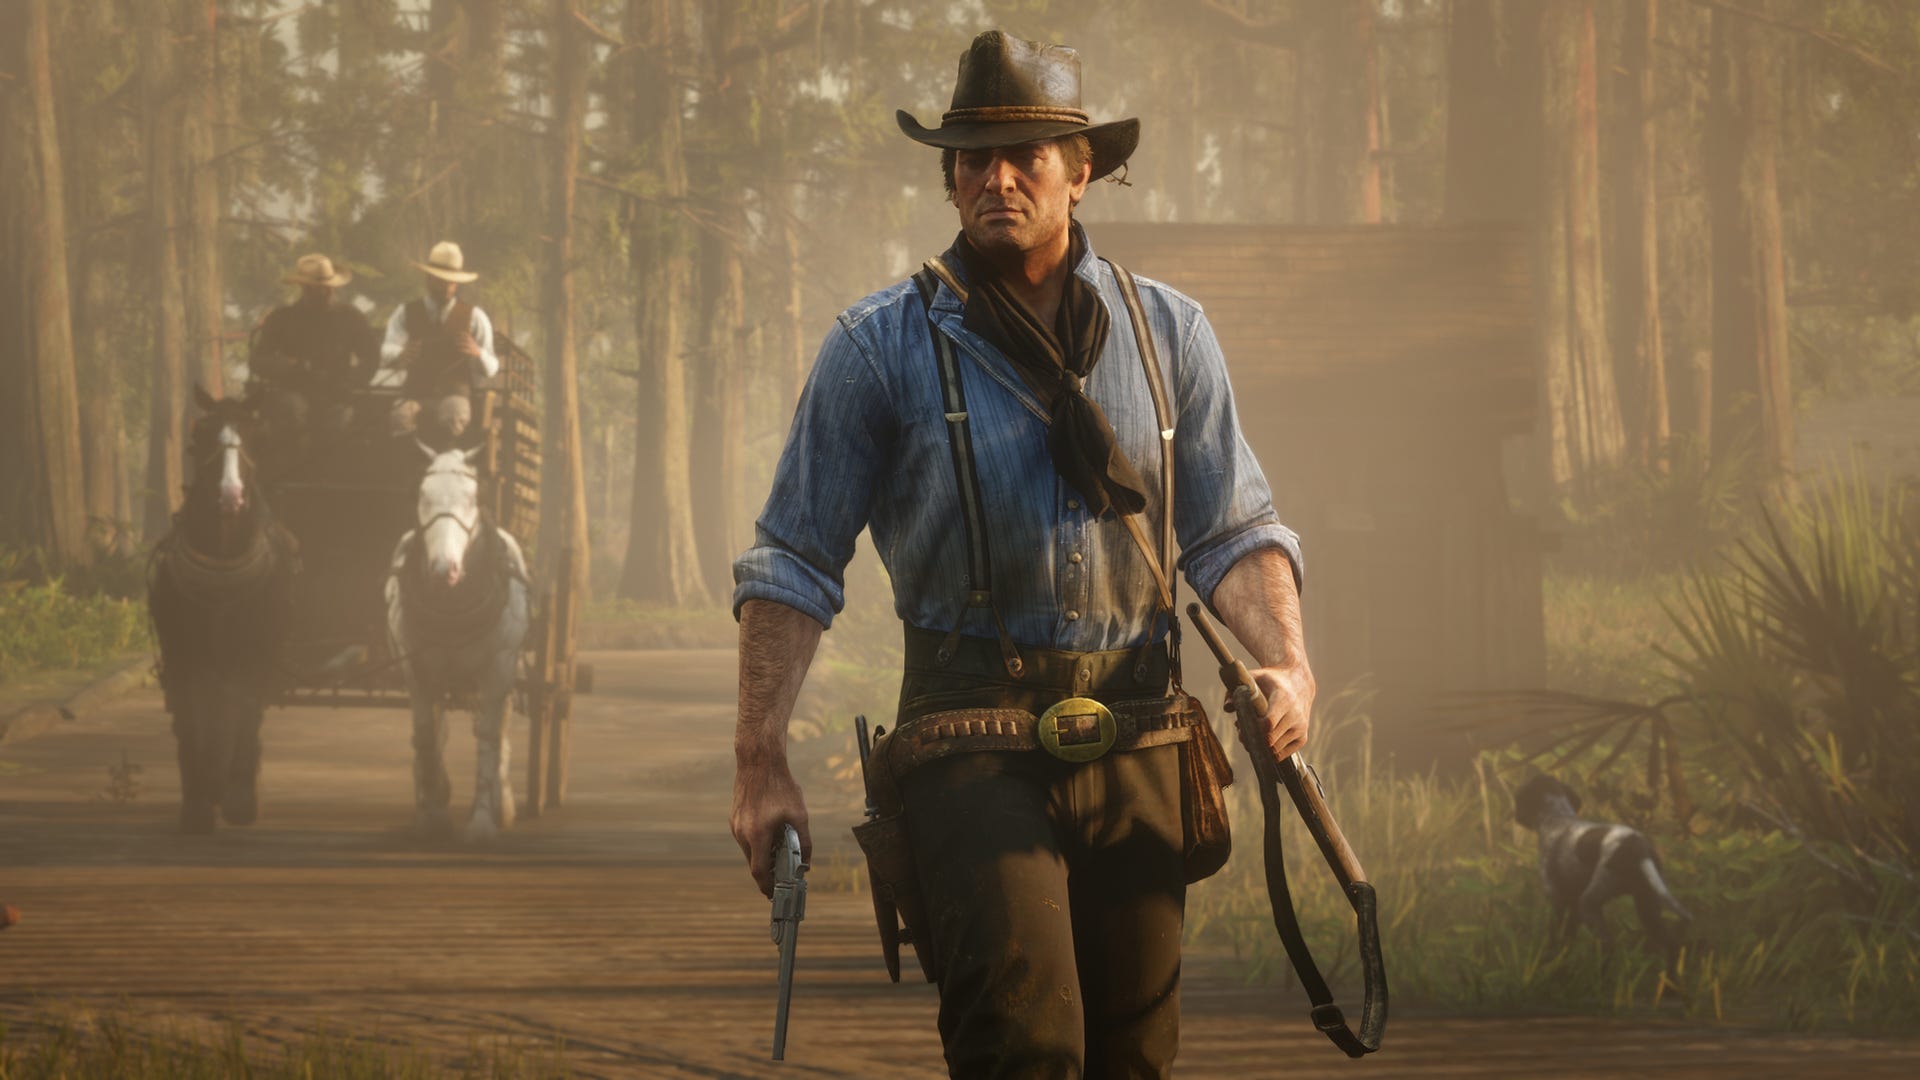 Red Dead Redemption 2 and what it has to say about the human condition